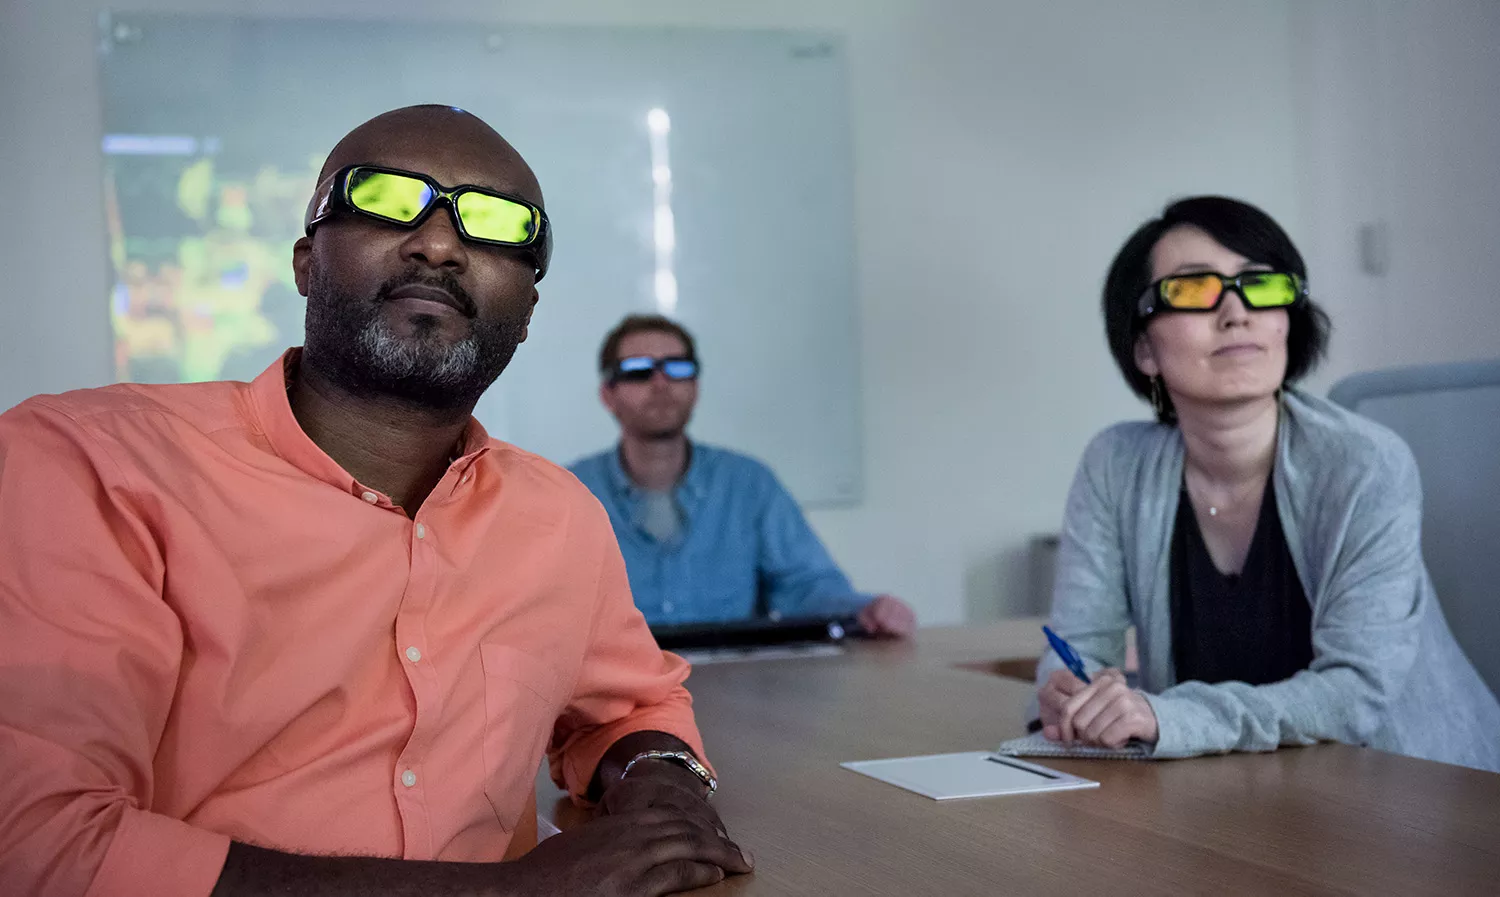 Group of business people watching at a screen using special glasses